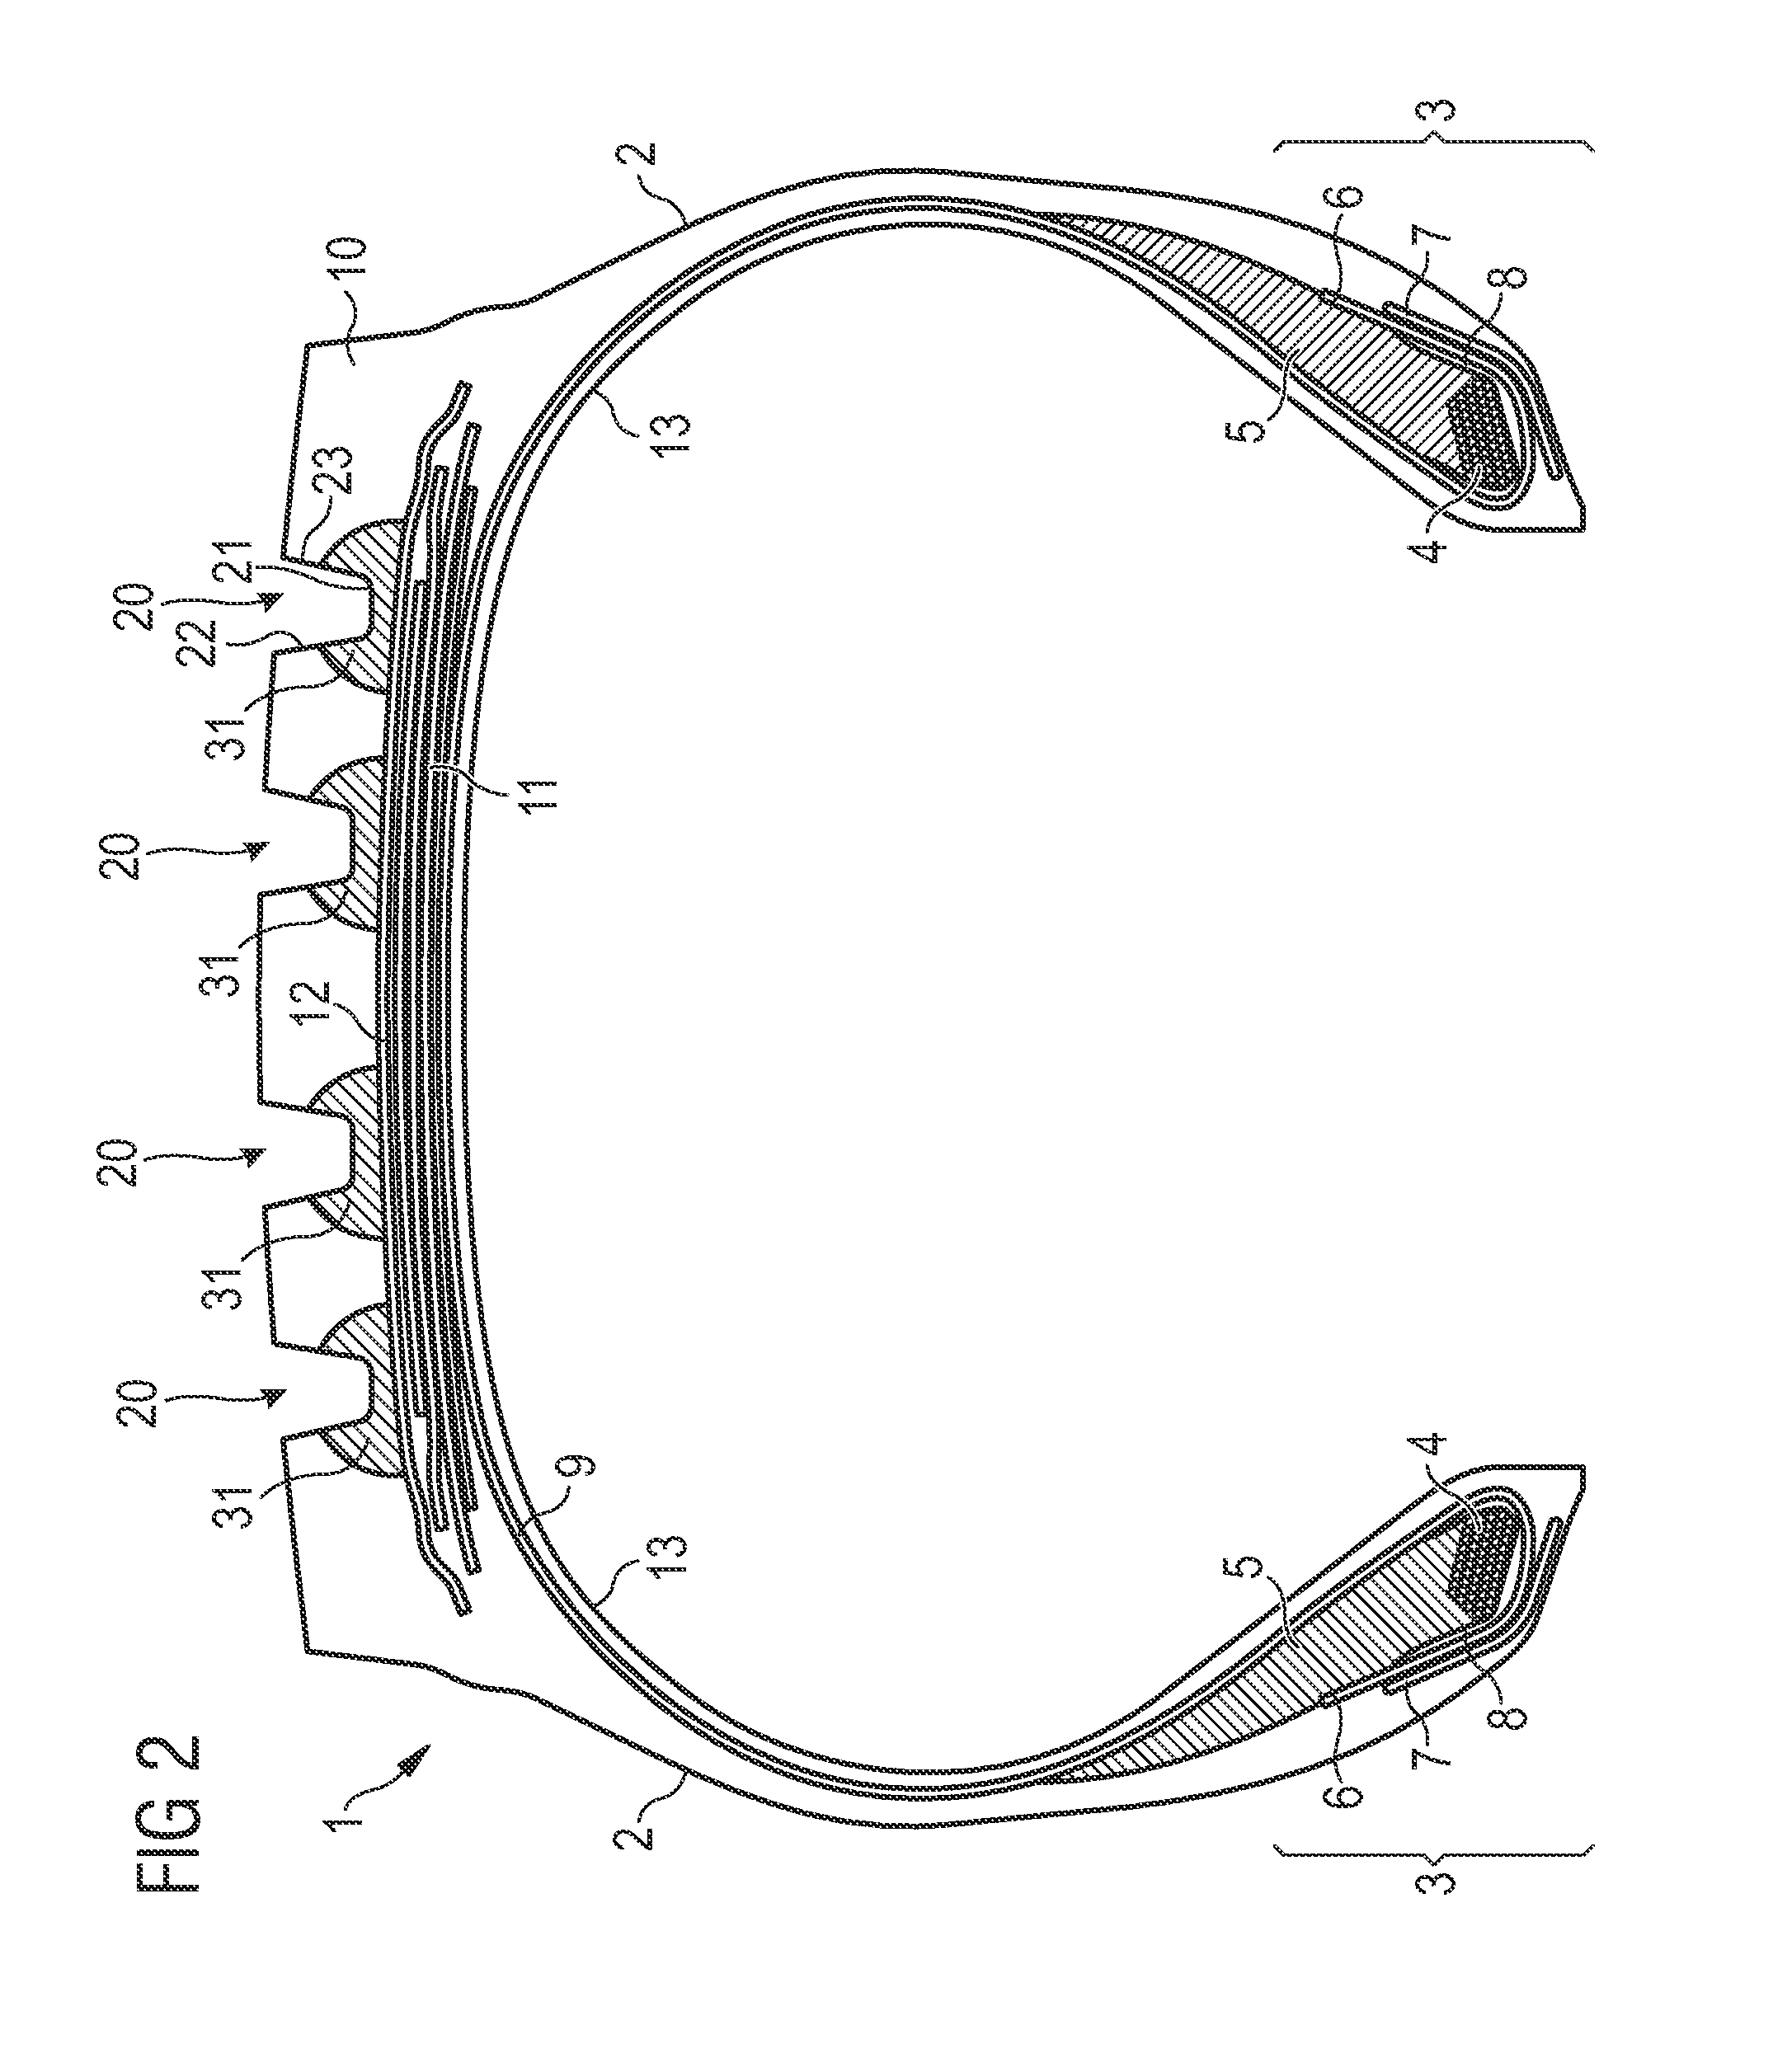 Tire tread with groove reinforcement